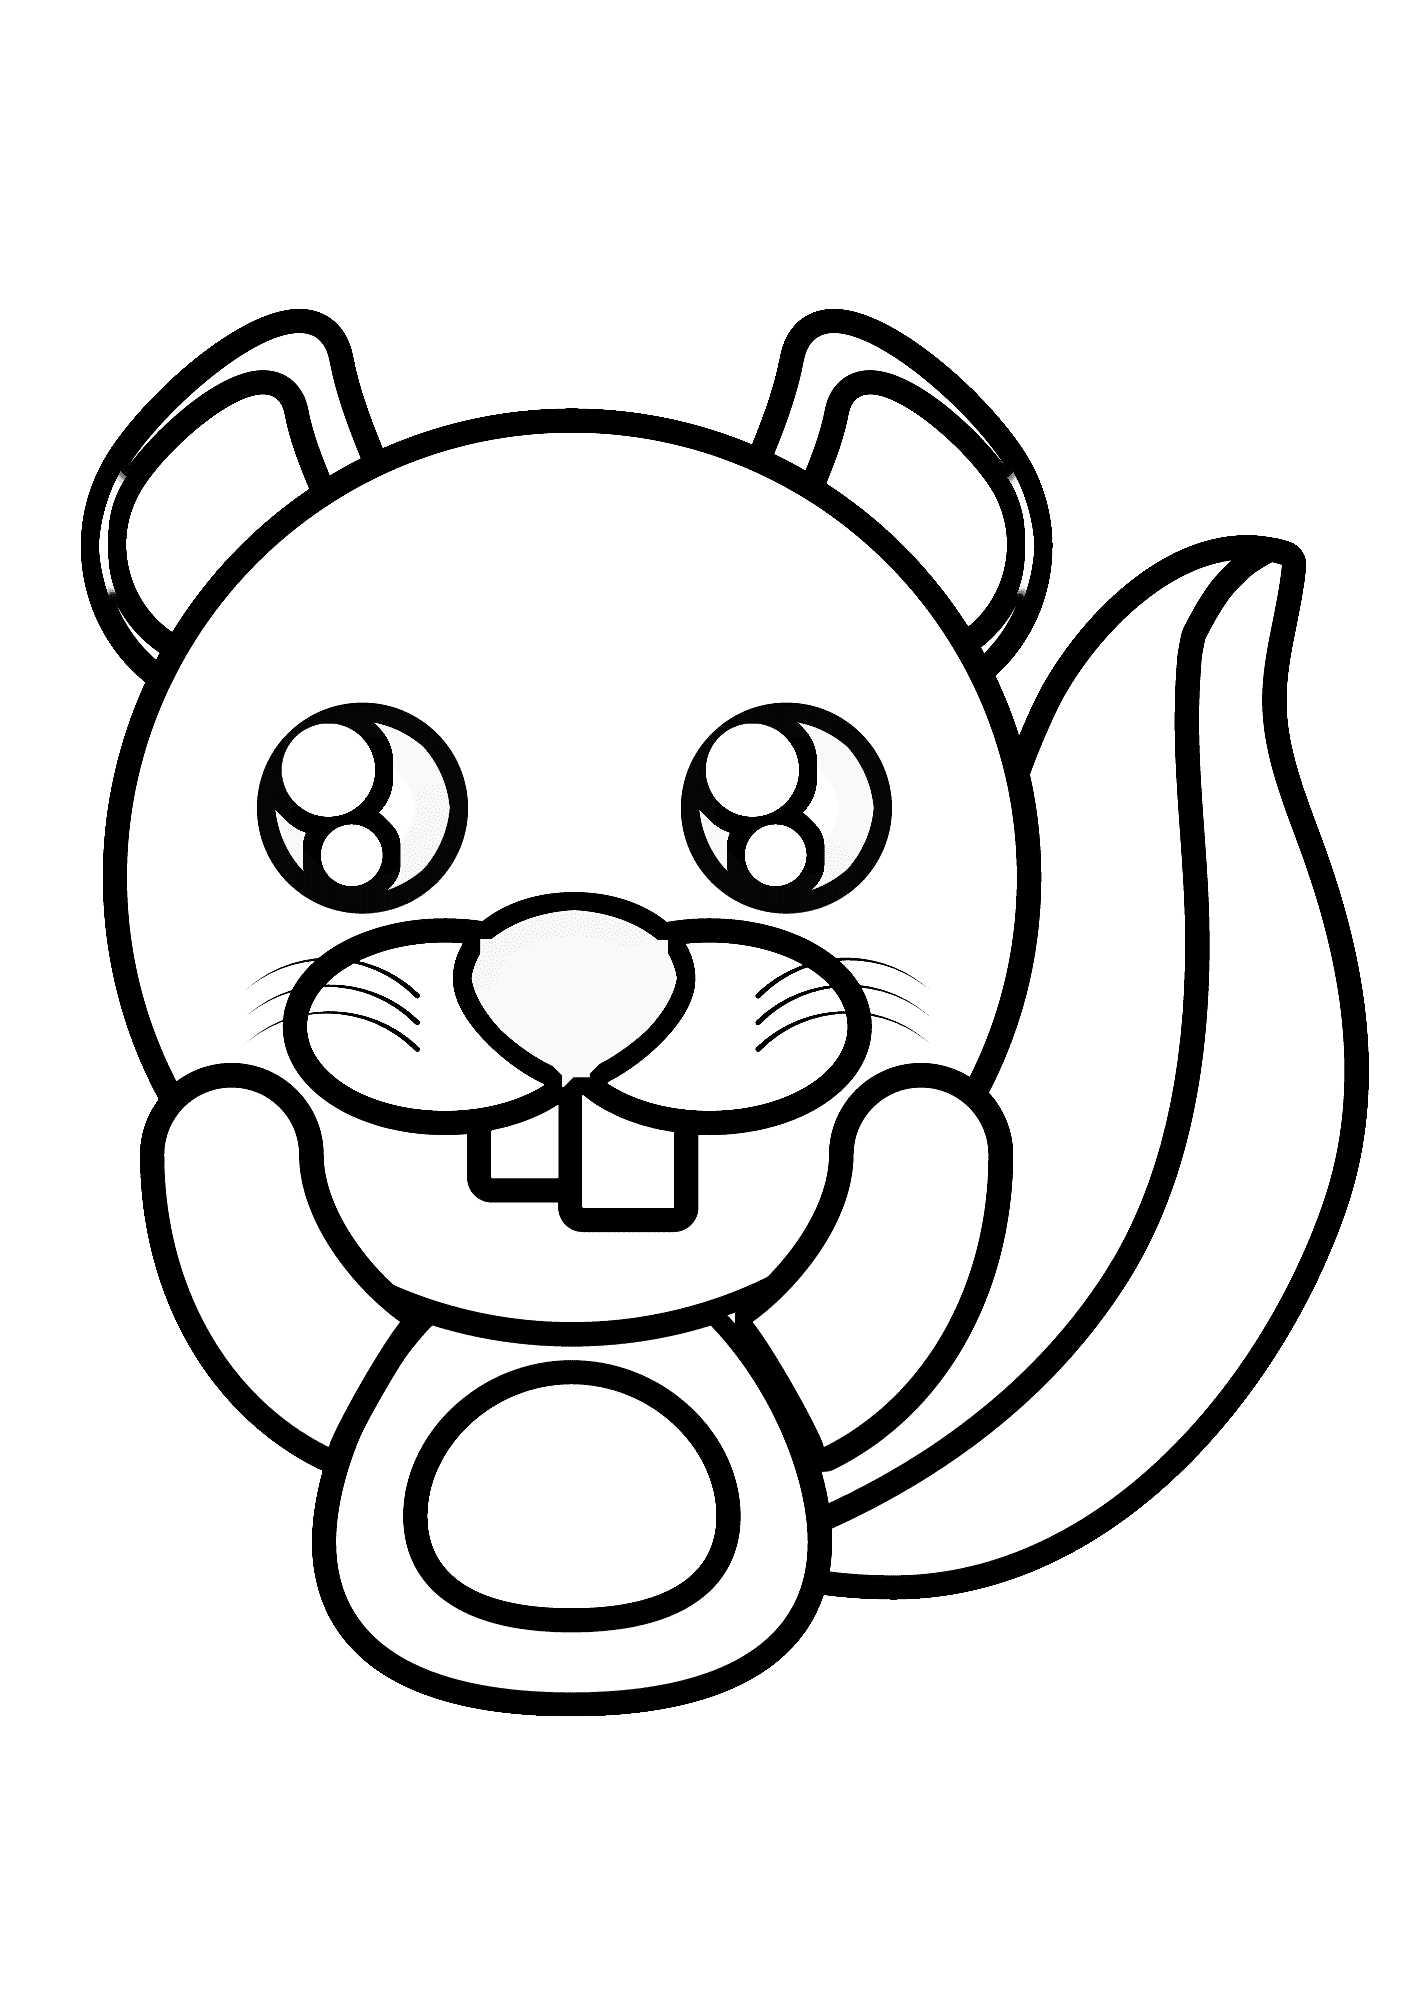 Beaver Painting Coloring Page